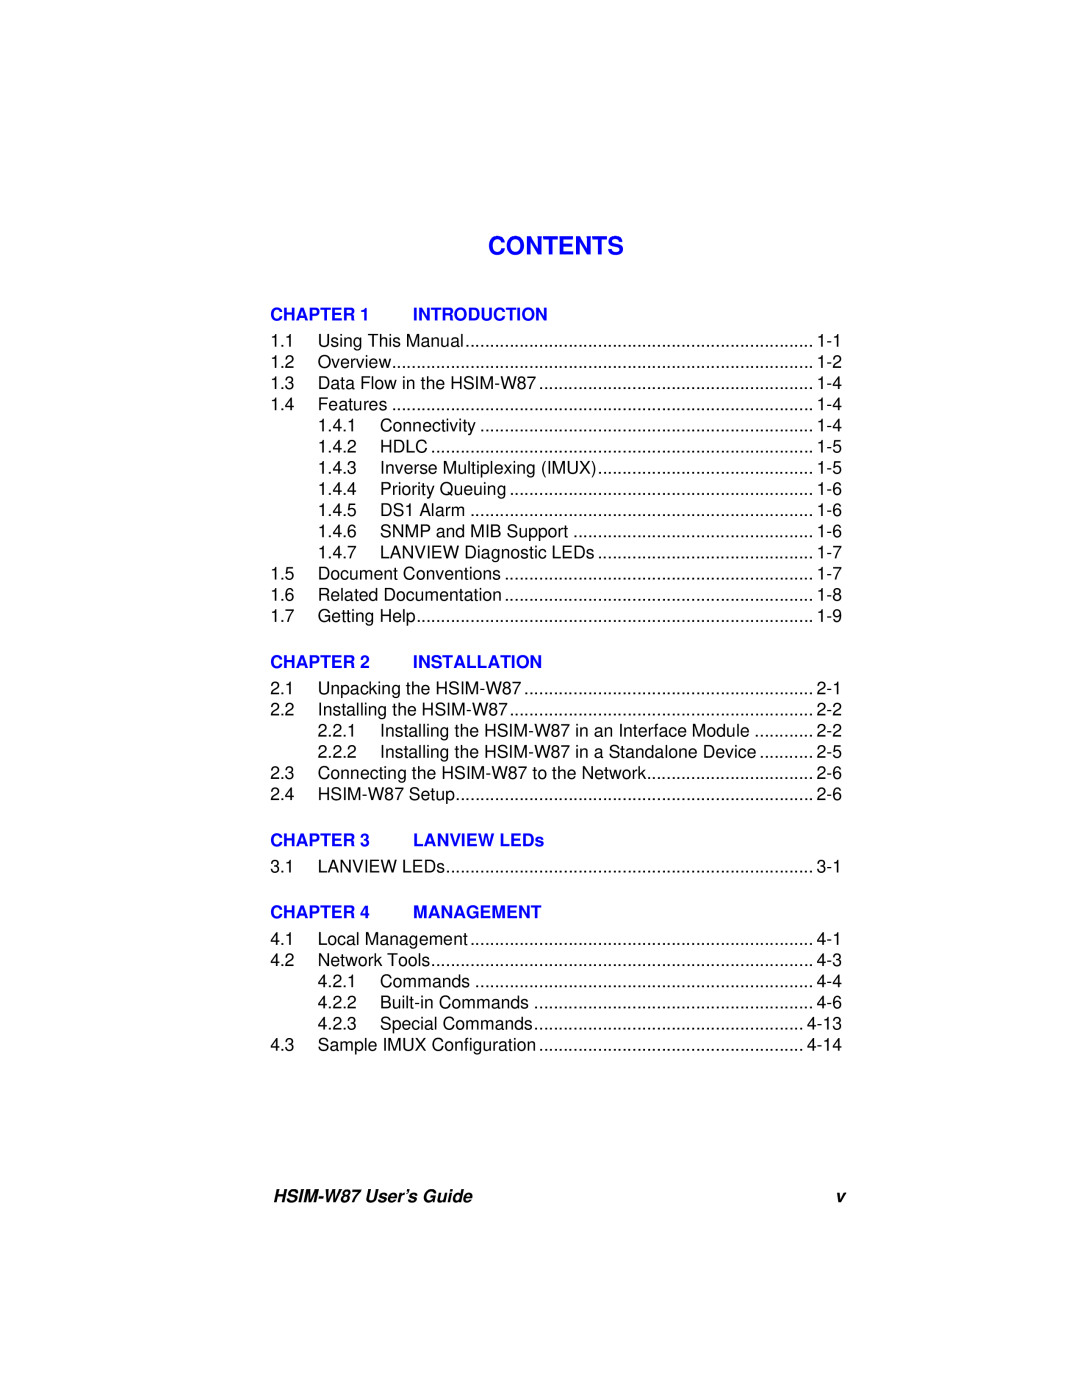 Cabletron Systems manual Contents, Chapter, Introduction, Installation, LANVIEW LEDs, Management, HSIM-W87 User’s Guide 